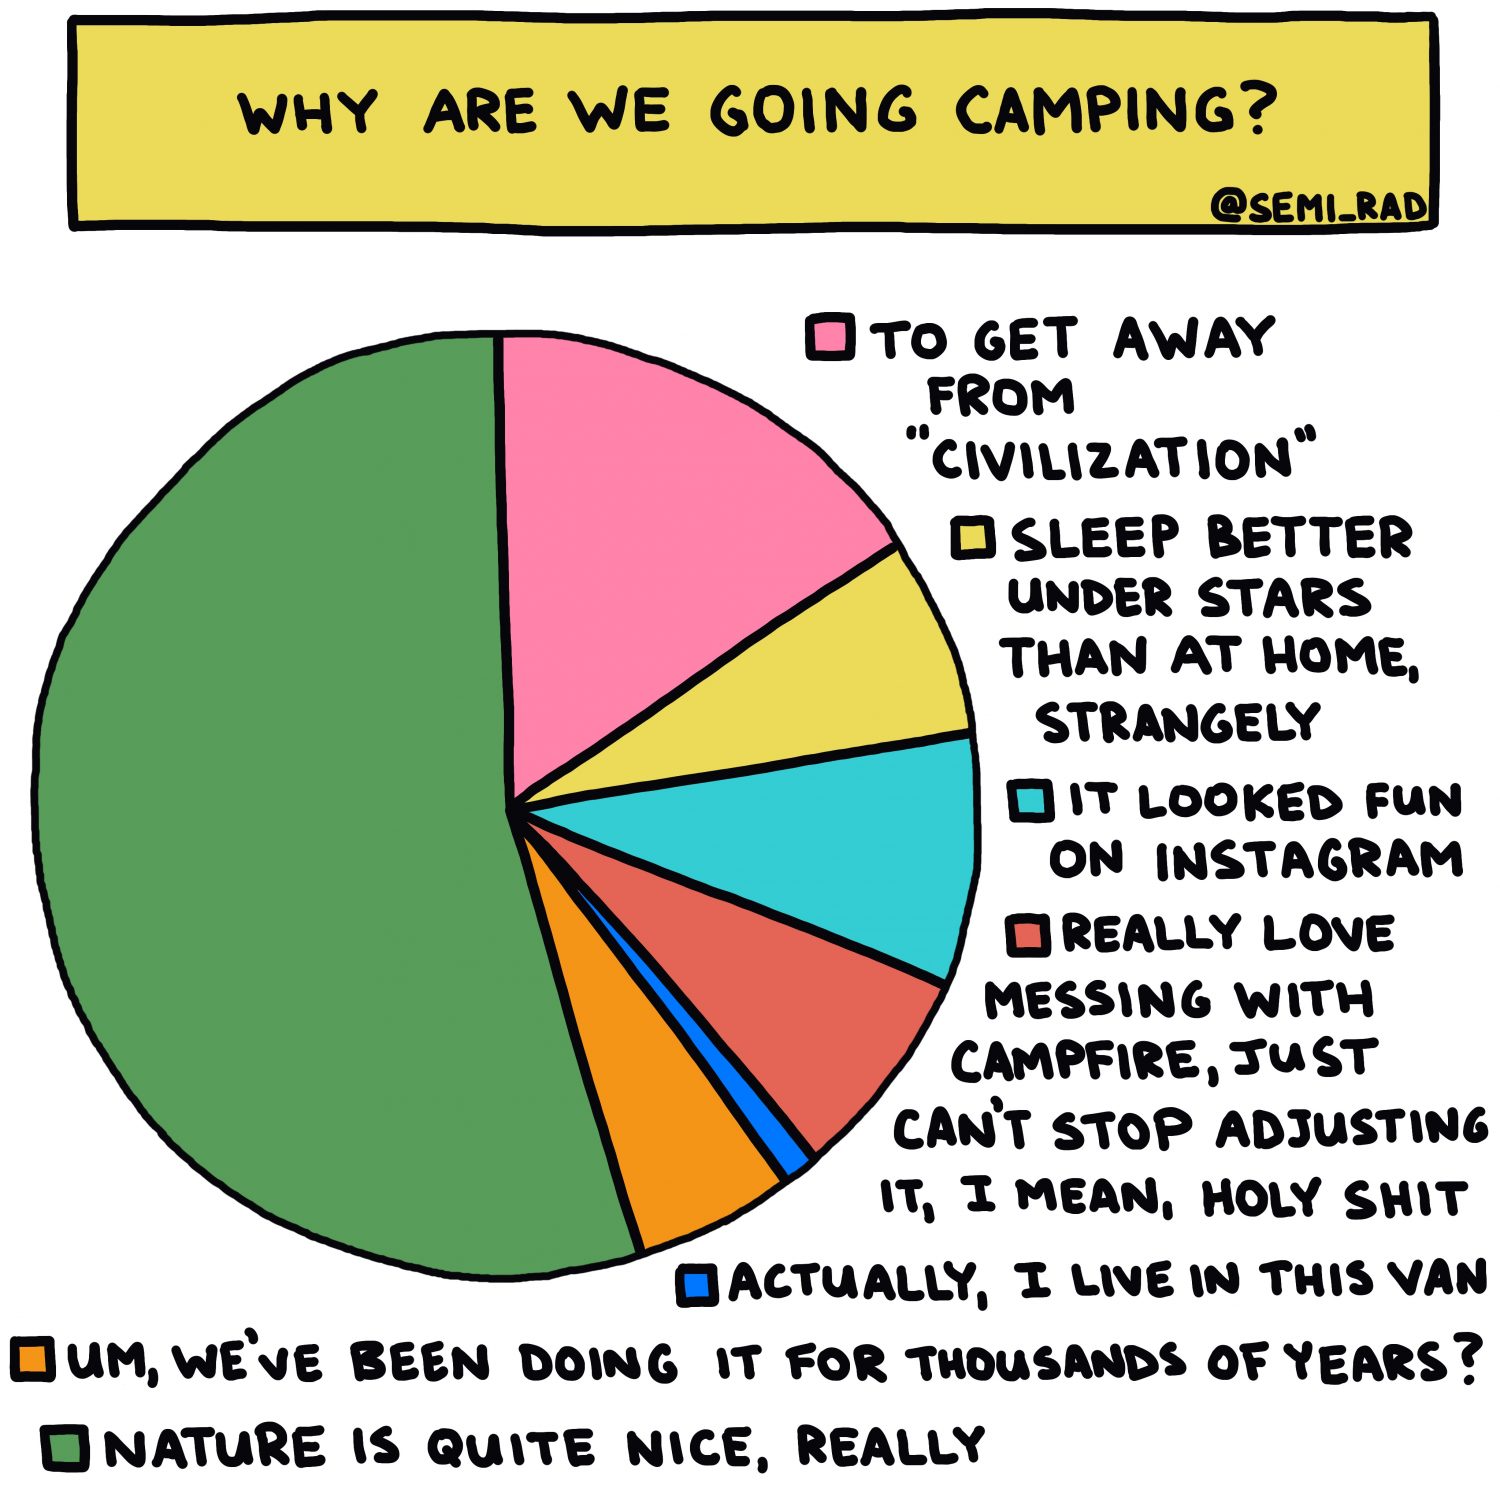 Why Are We Going Camping?